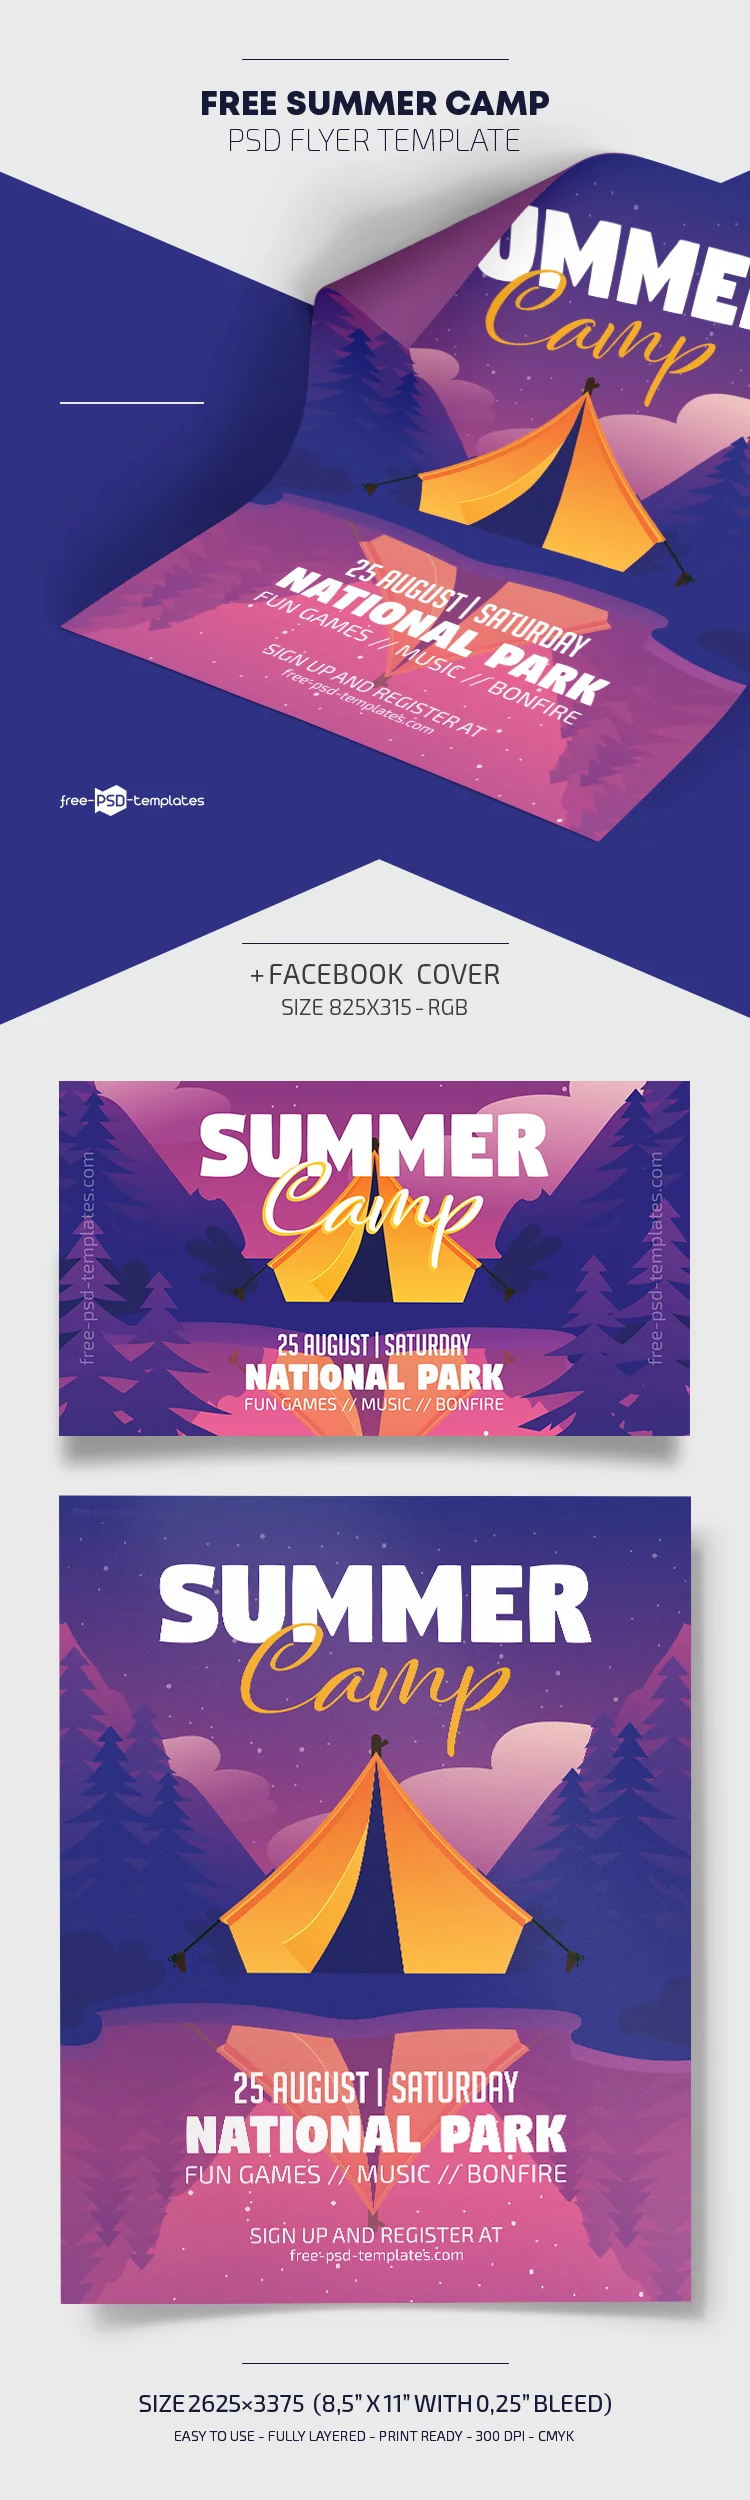 Free Summer Camp Flyer in PSD